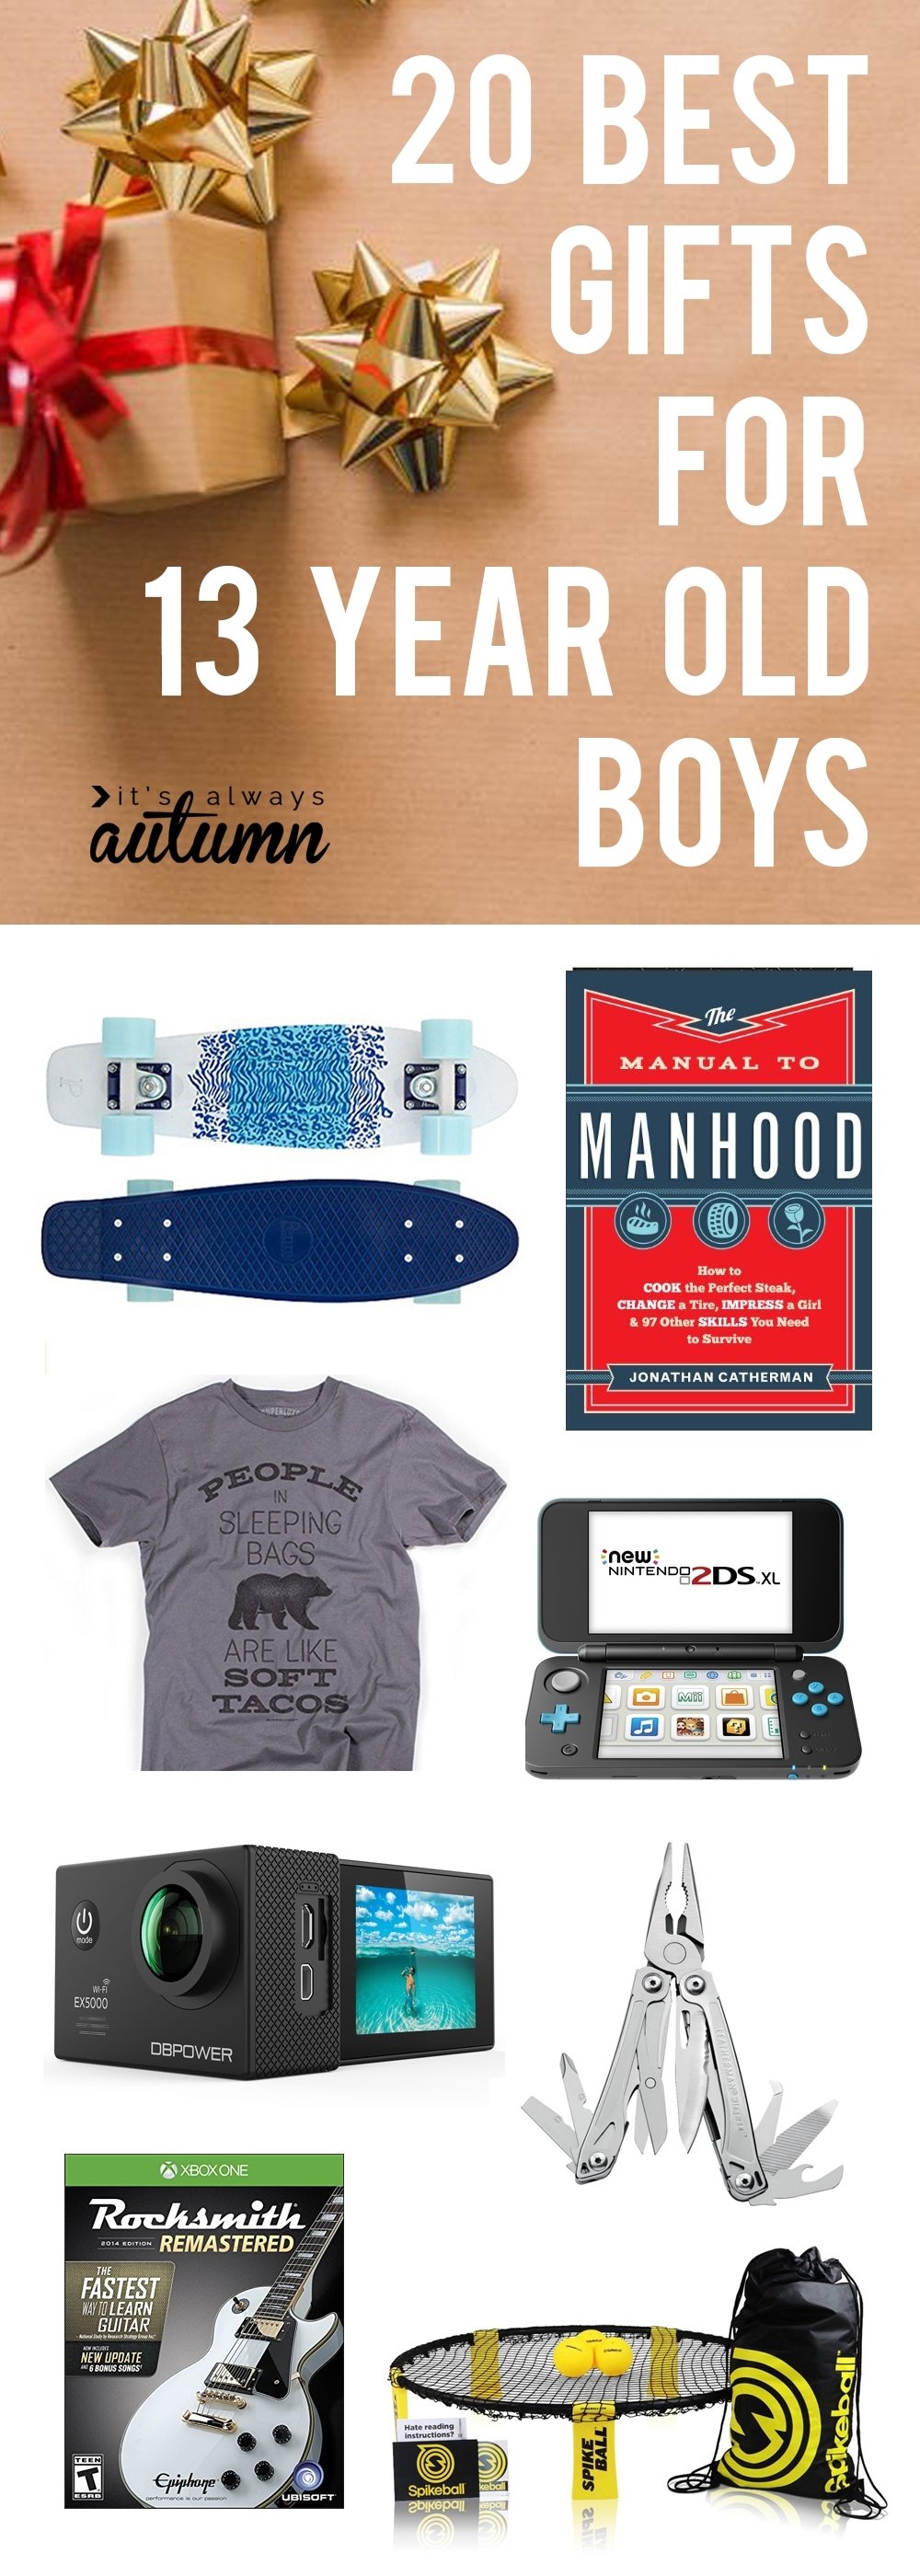 10 Best Christmas Gift Ideas For Boys best christmas gifts for 13 year old boys its always autumn 2 2022